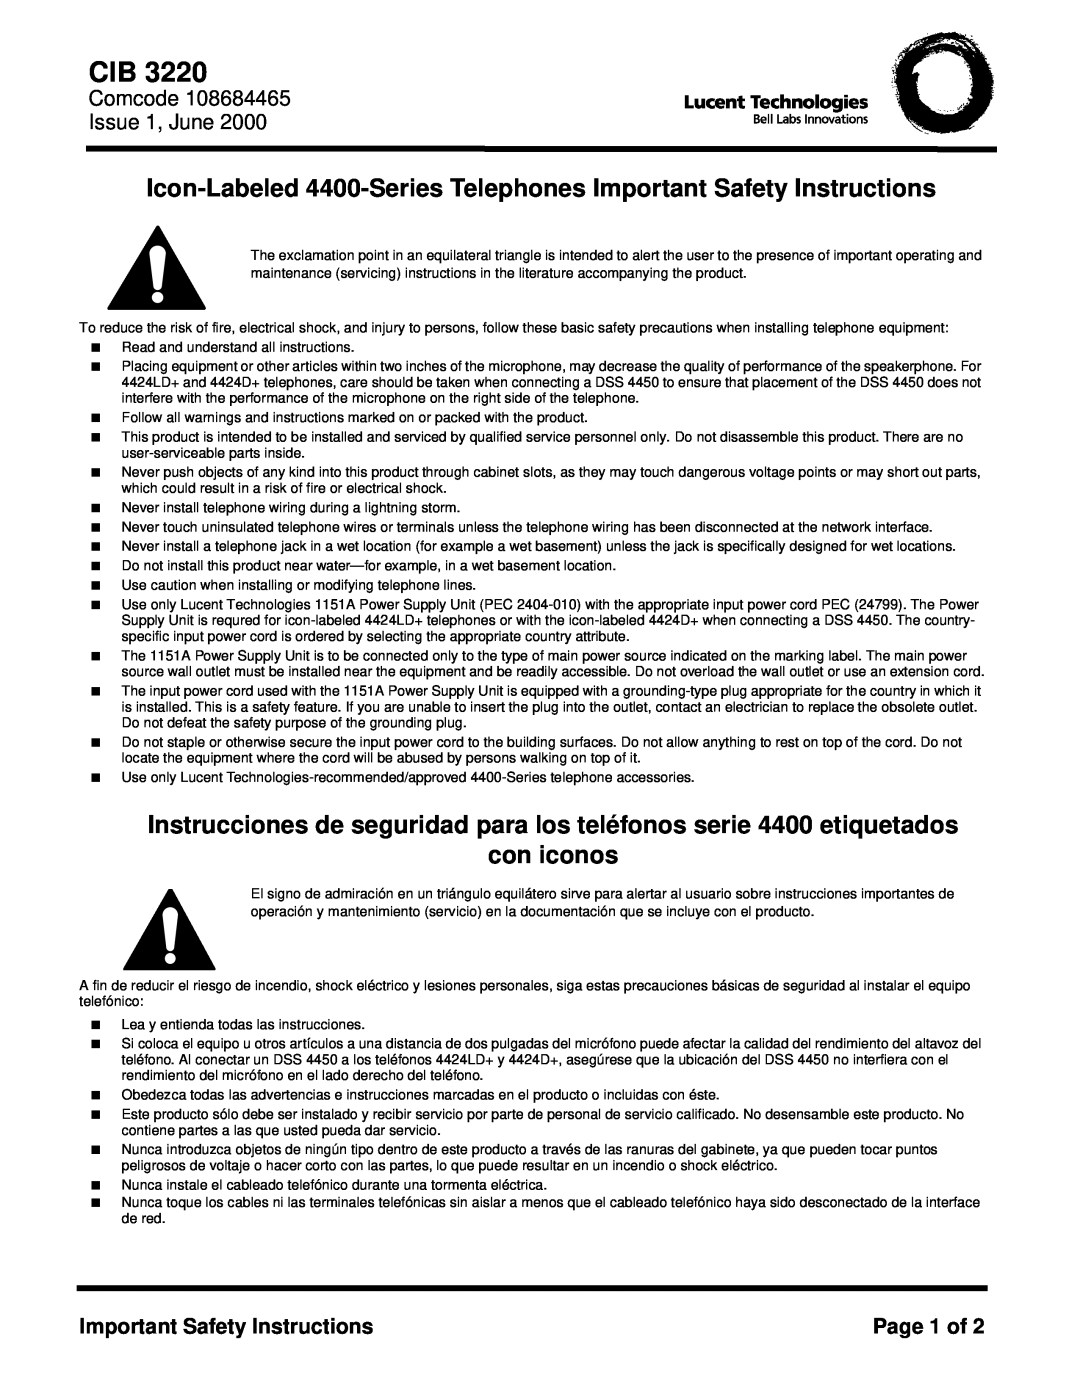 Lucent Technologies 4400-Series important safety instructions con iconos, Comcode Issue 1, June, Page 1 of 